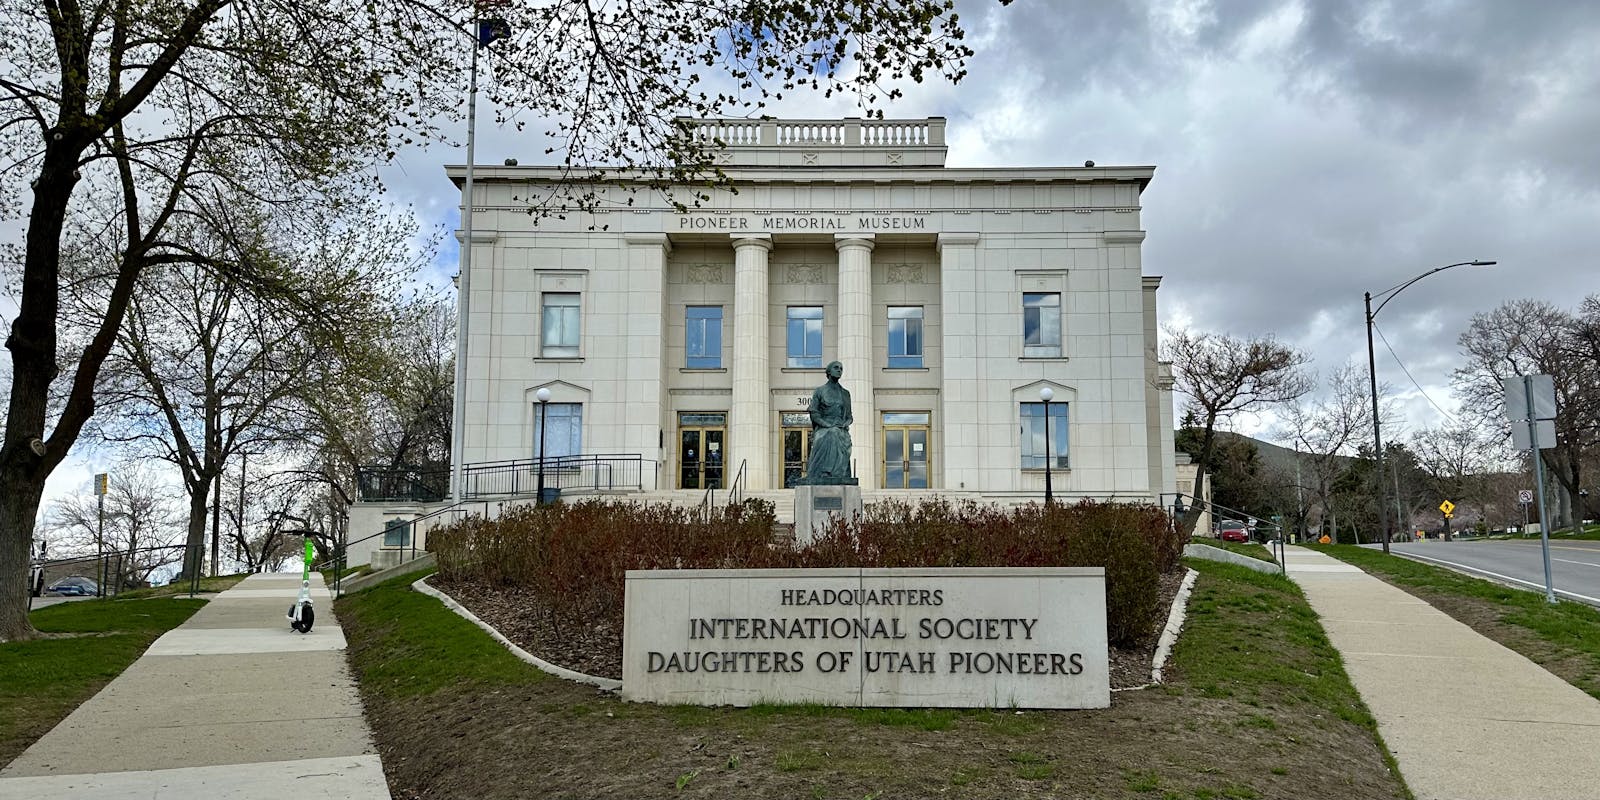 A grand building with Pioneer Memorial Museum written in gold letters along the top, and a plaque in front of it reading Headquarters International Society Daughters of Utah Pioneers